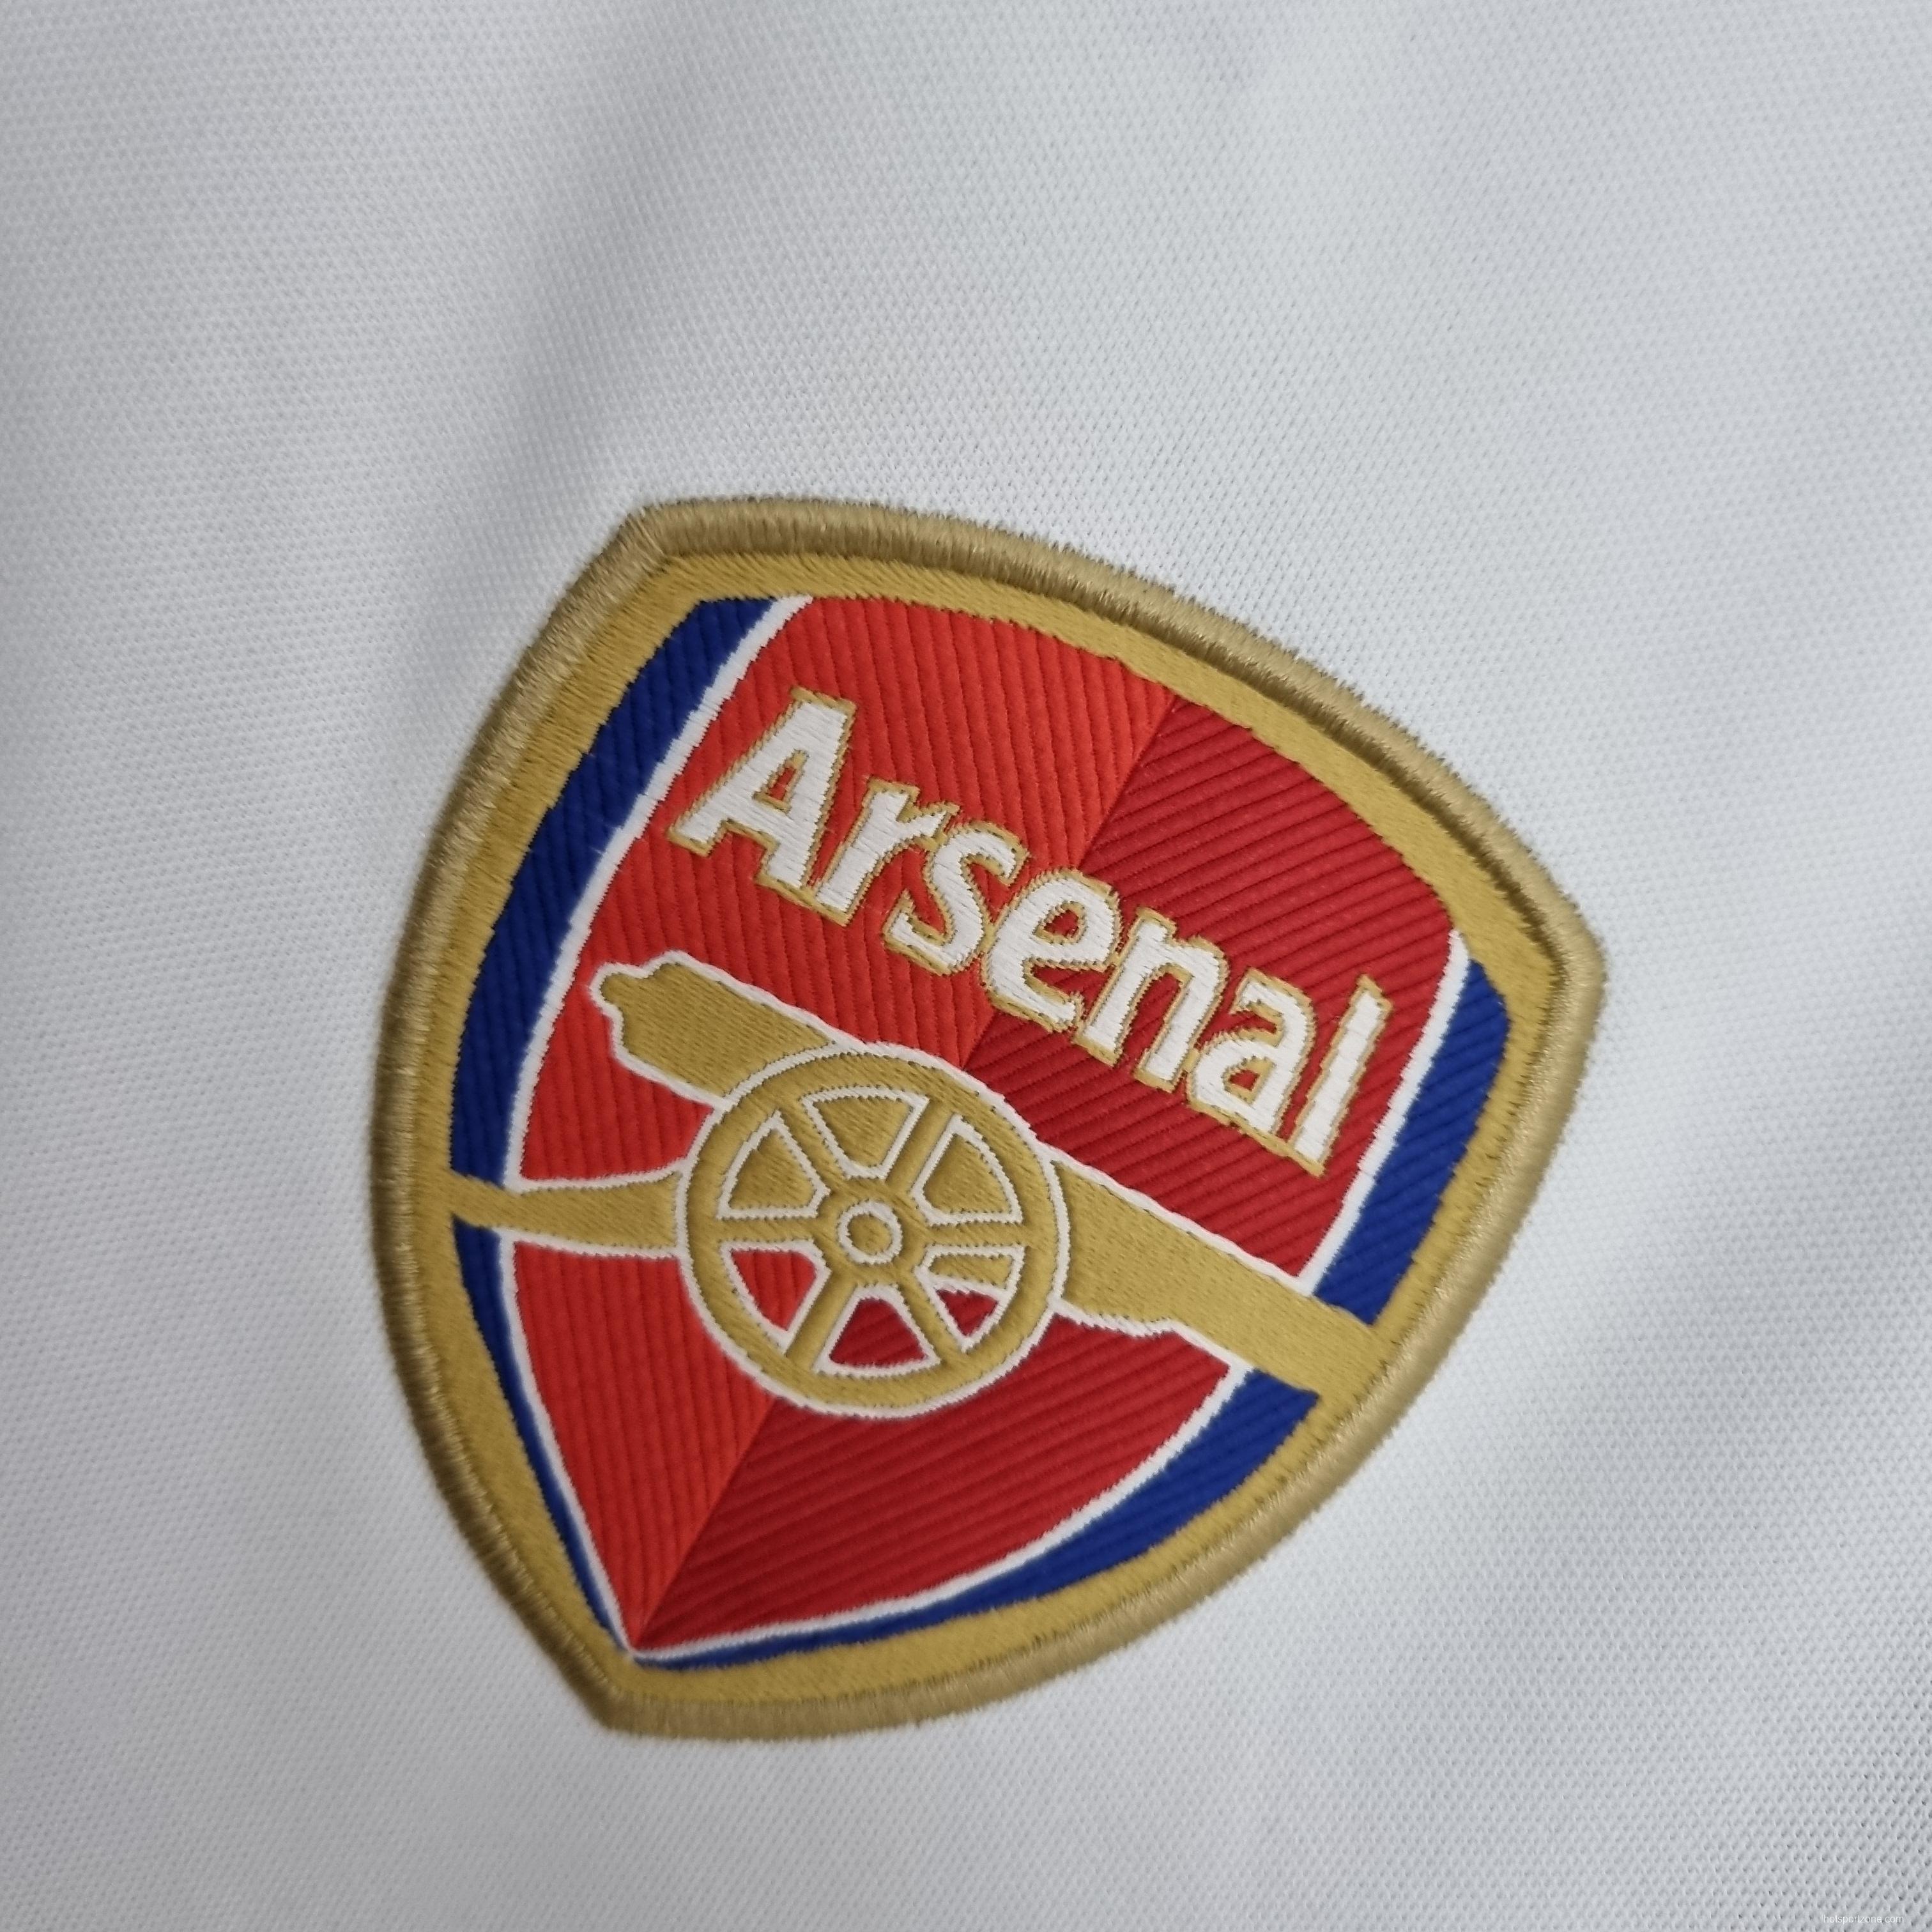 22/23 Arsenal Training Suit White Soccer Jersey